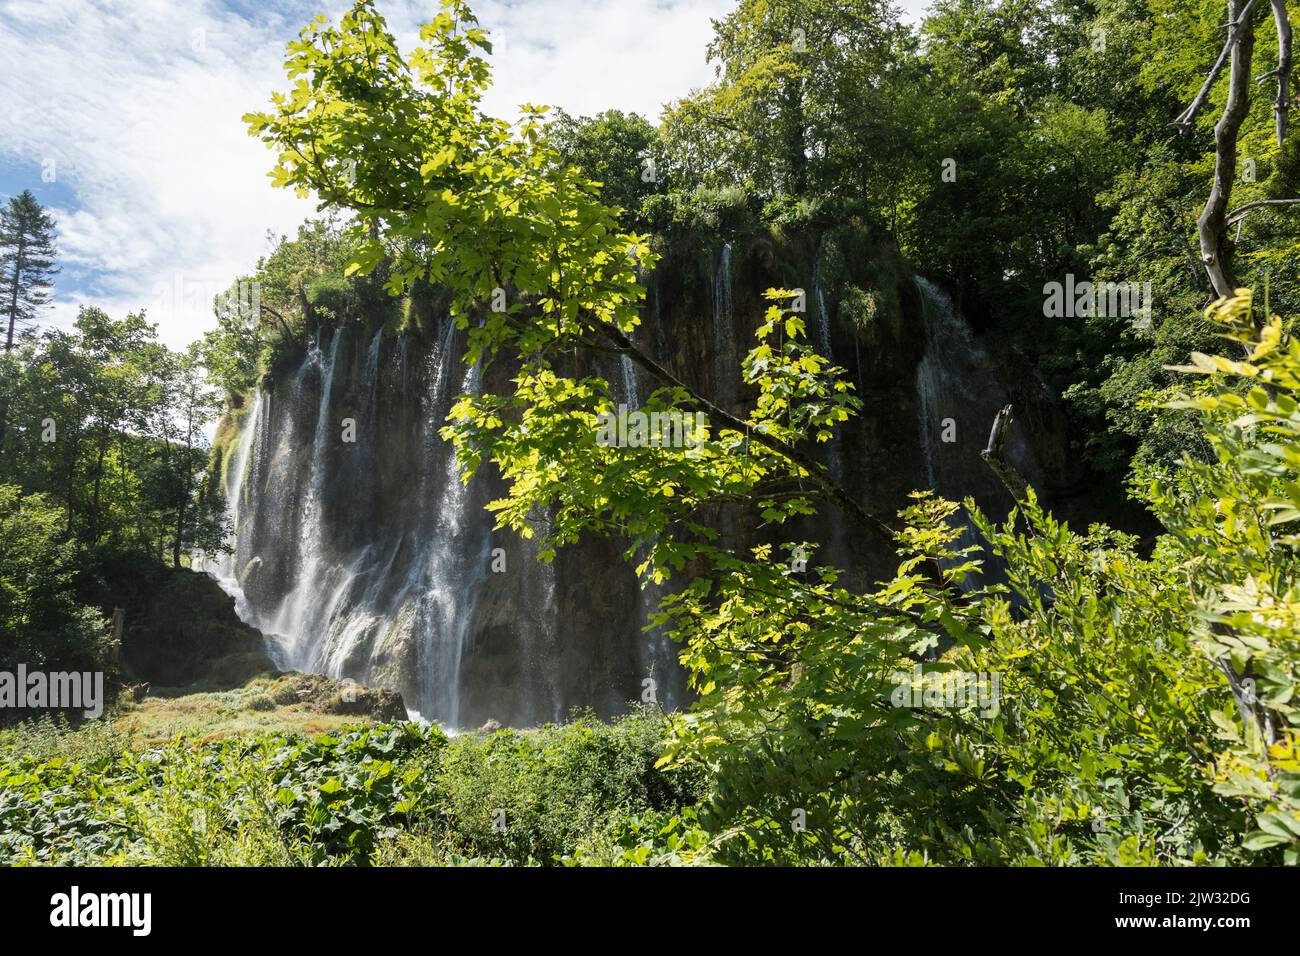 Water splashing down from the rocks of one of the many waterfalls in Plitvice Lakes National Park, Croatia, Europe. Stock Photo